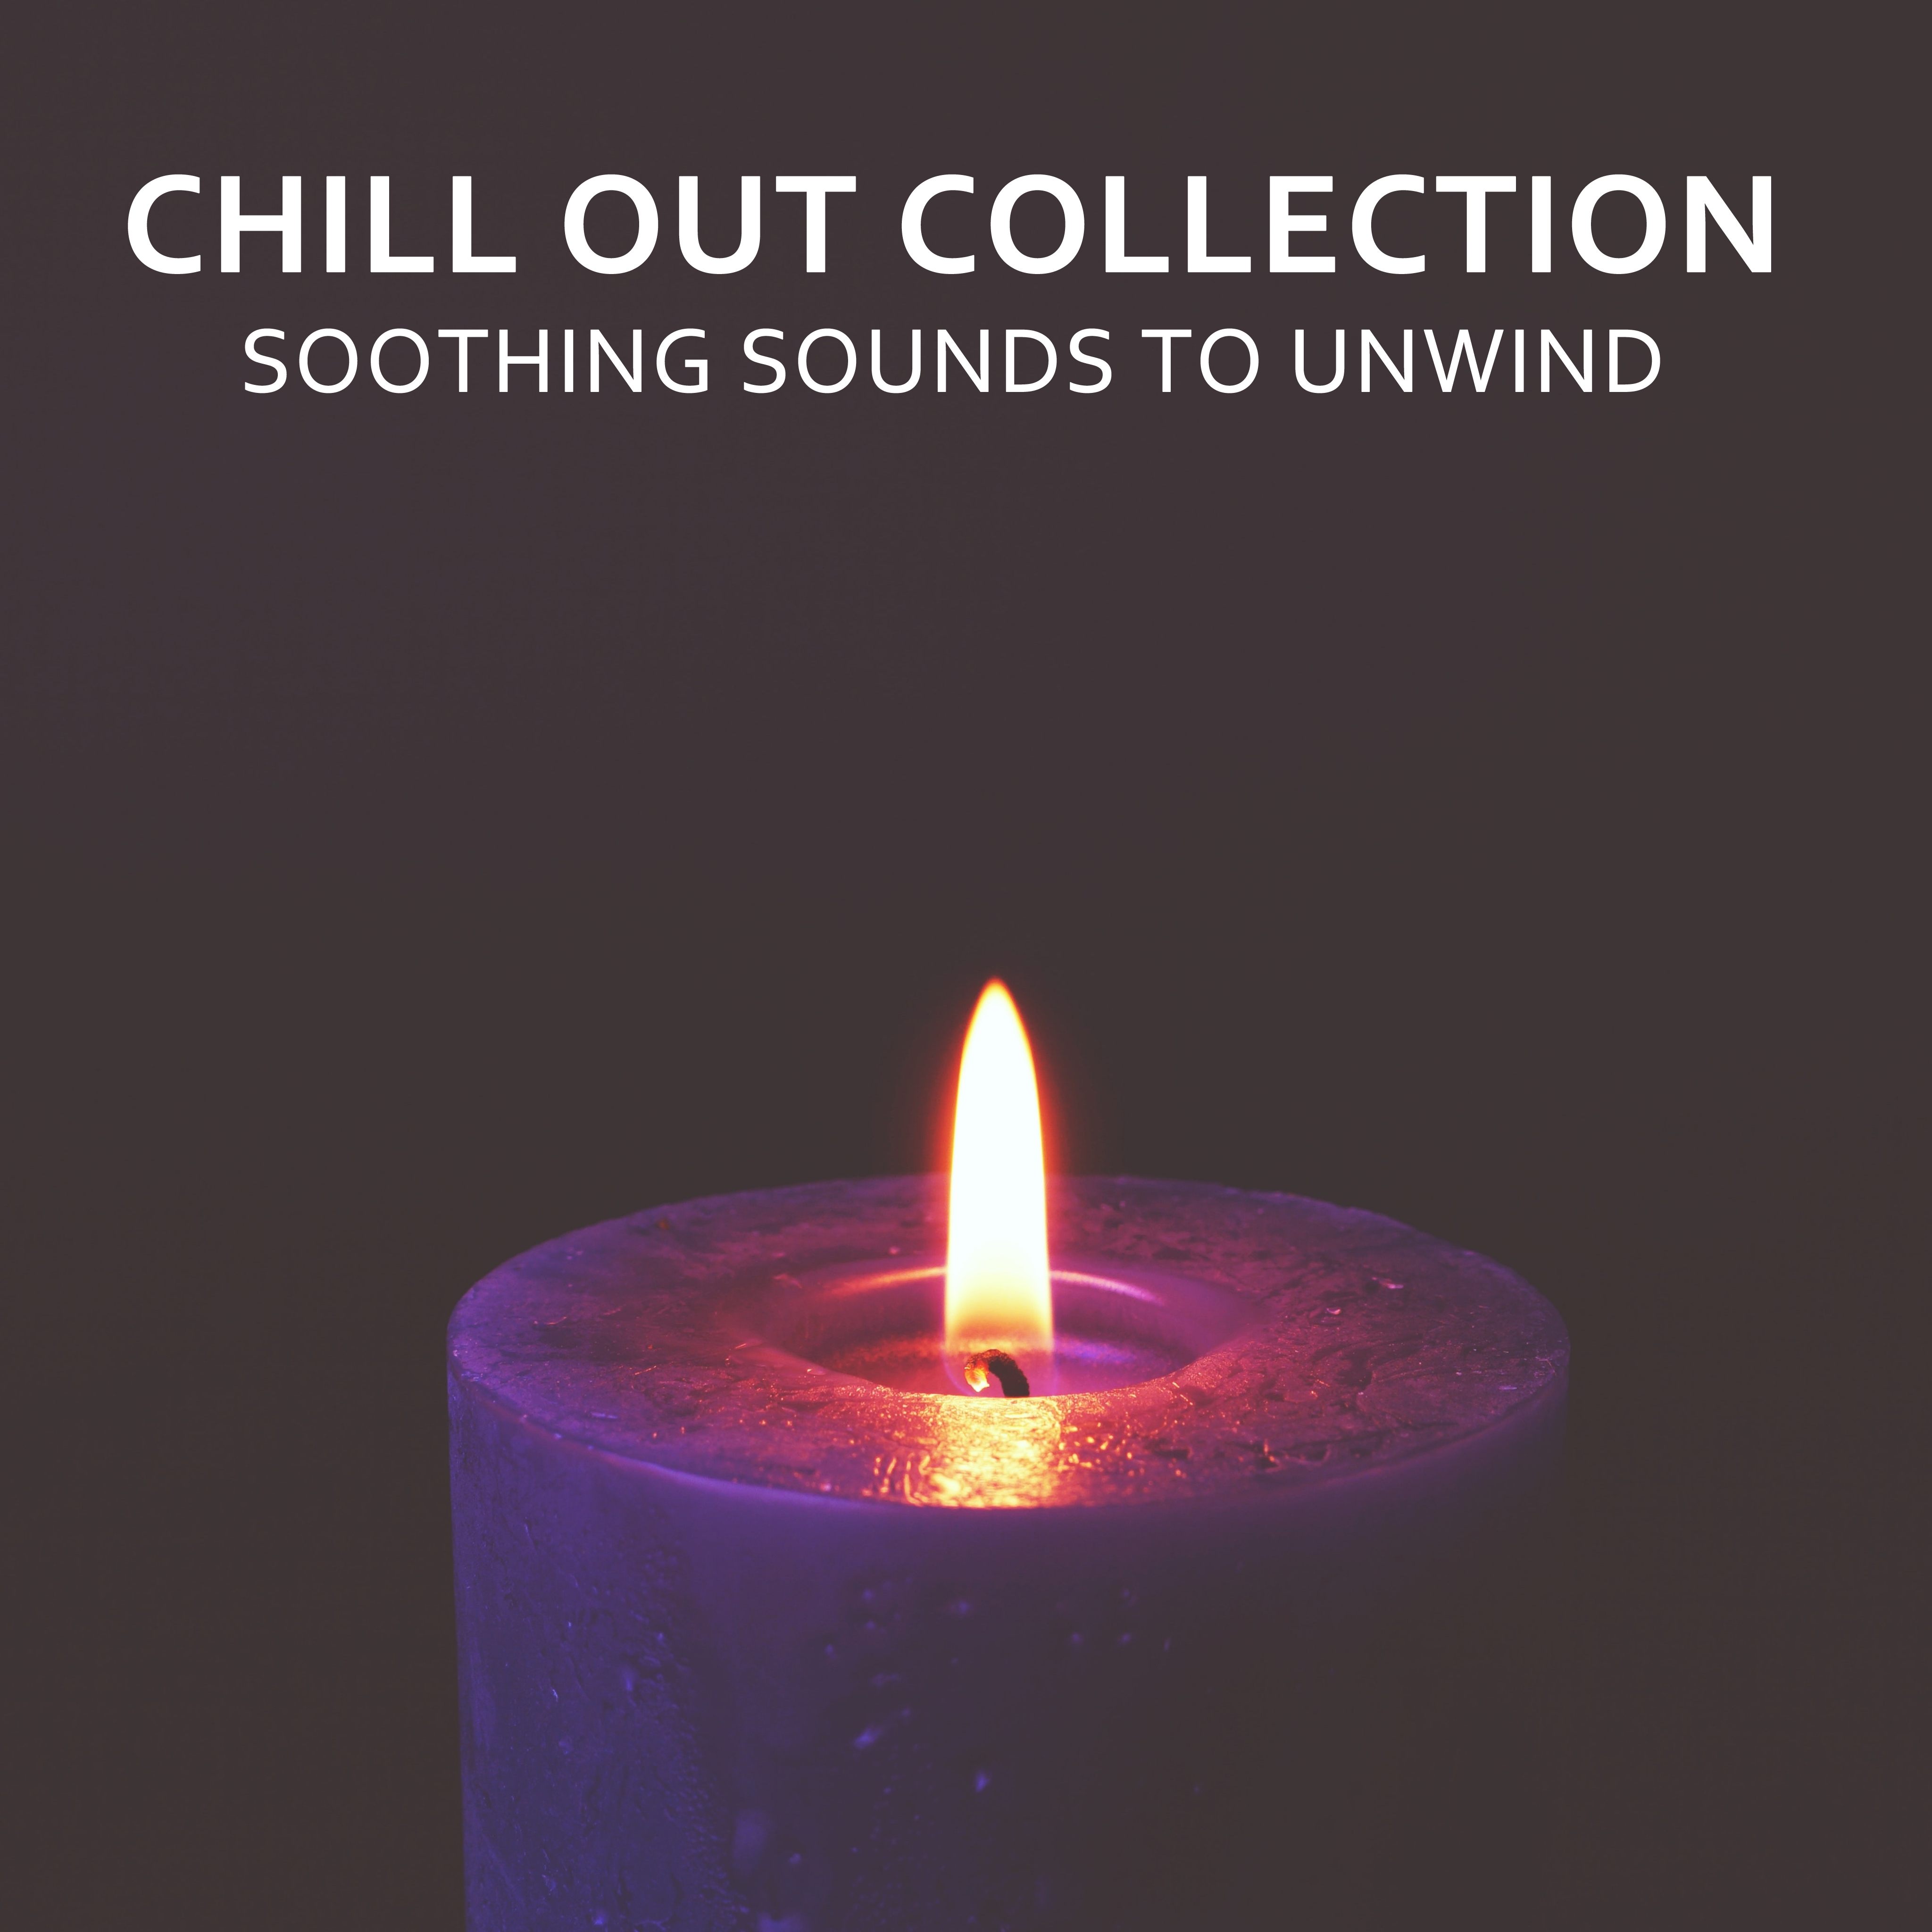 16 Chill Out Collection - Soothing SOunds to Unwind